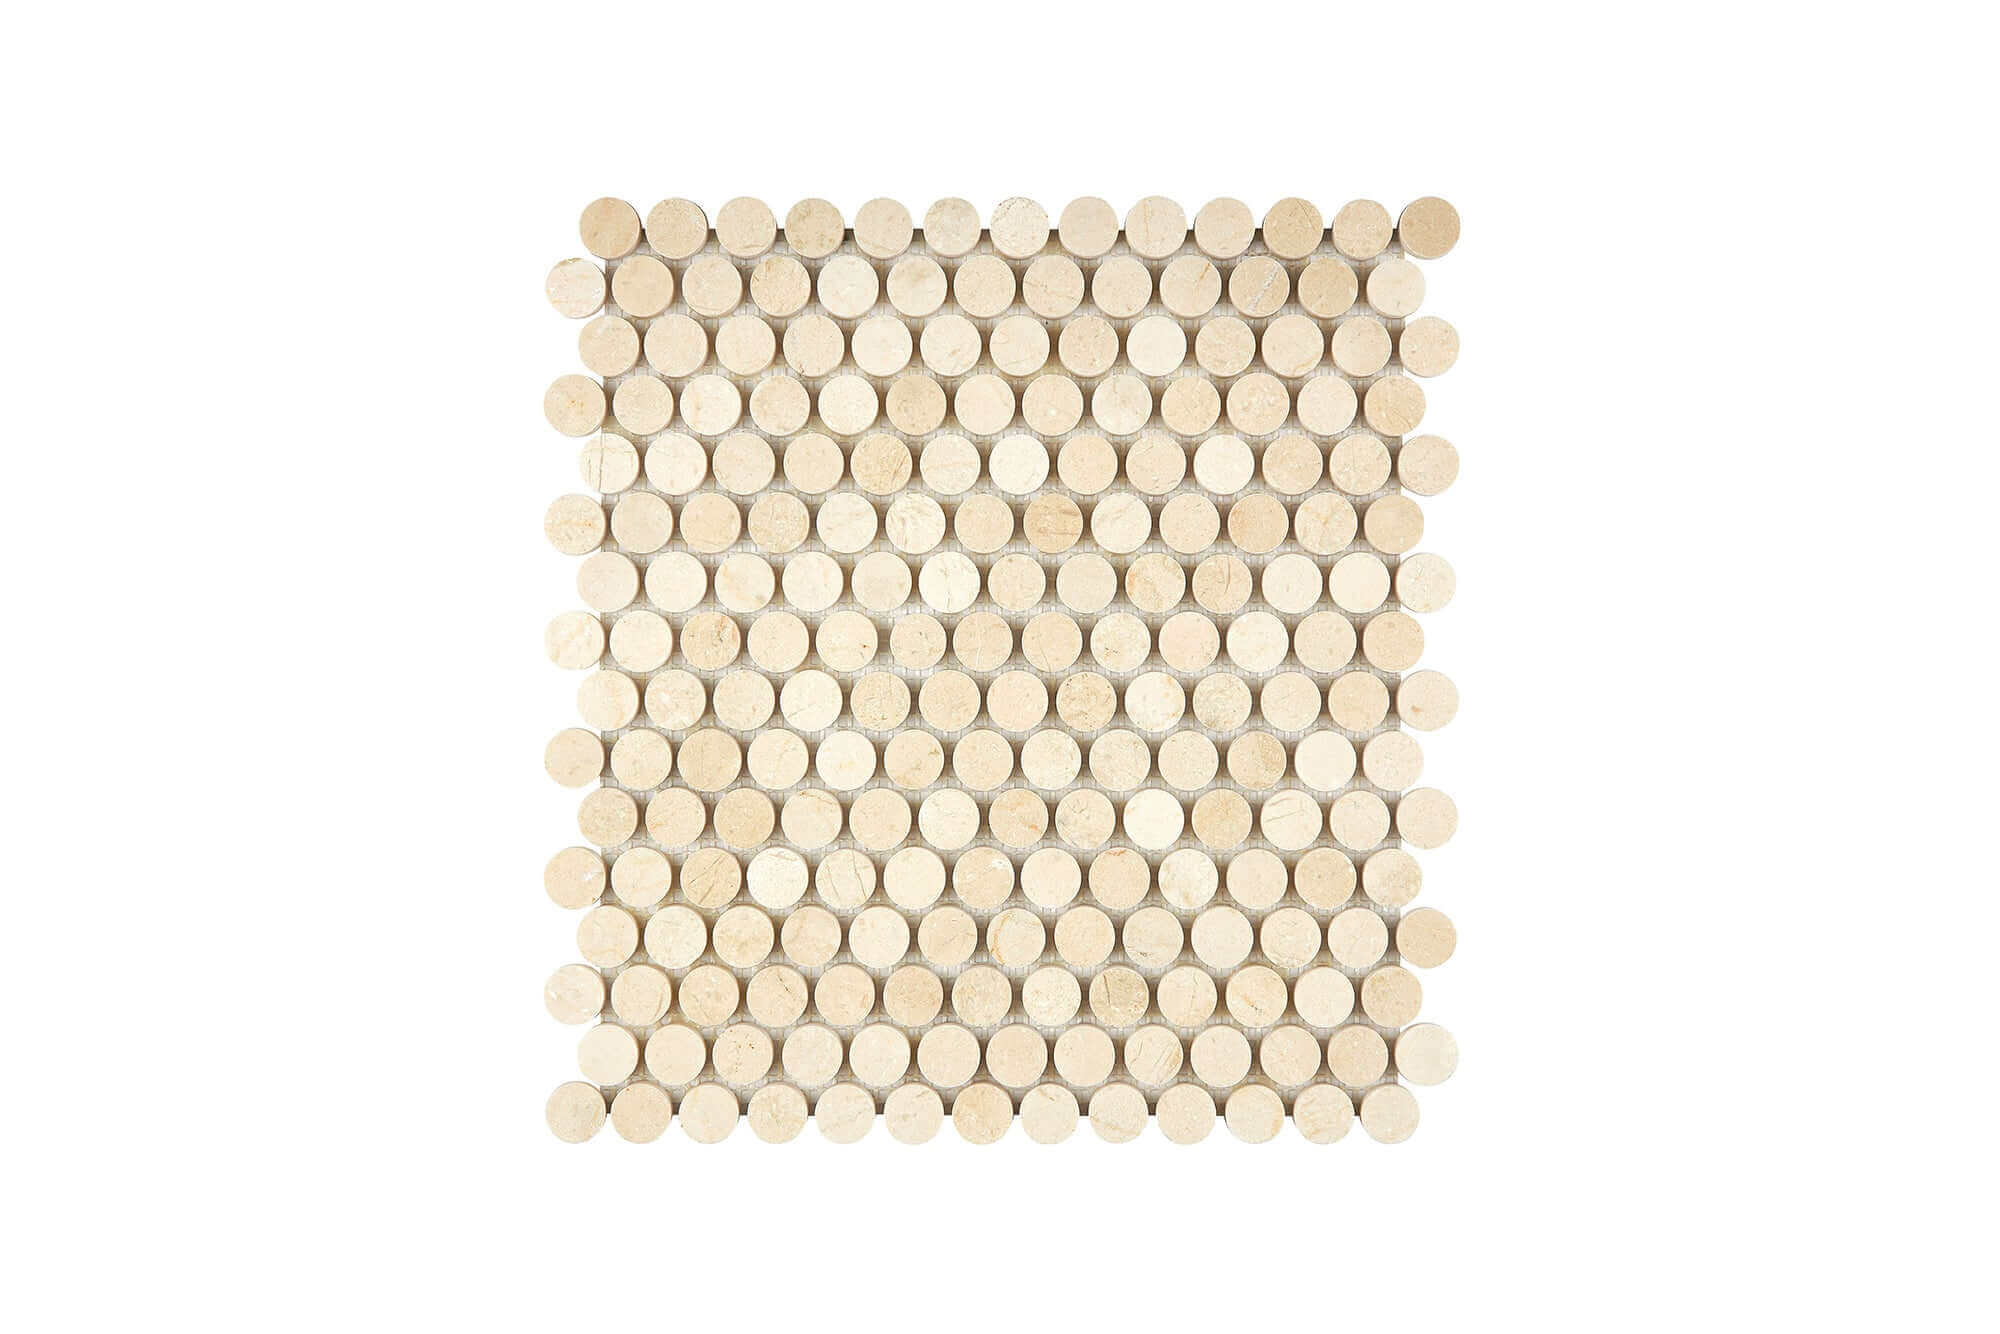 Crema Marfil Marble Mosaic Penny Round Single Color Honed